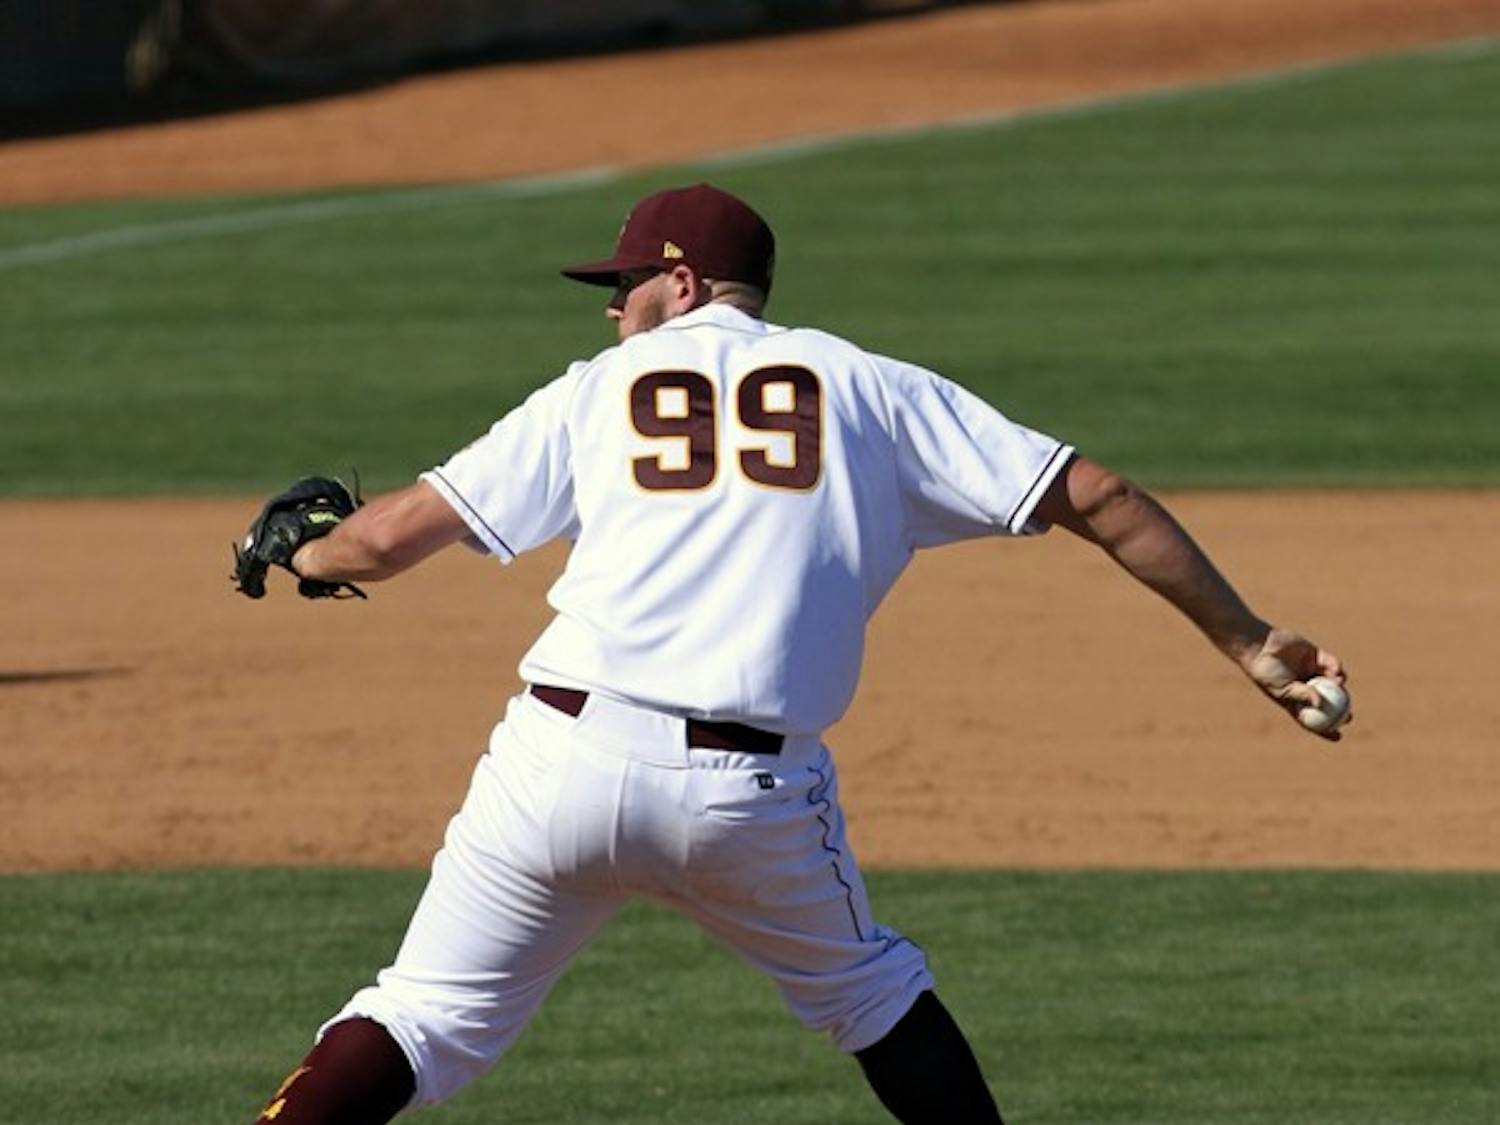 Jake Barrett throws a pitch in a game against UC Riverside on Feb. 26. Barrett and the Sun Devils’ bullpen are key contributors to the team’s recent success. (Photo by Sam Rosenbaum)